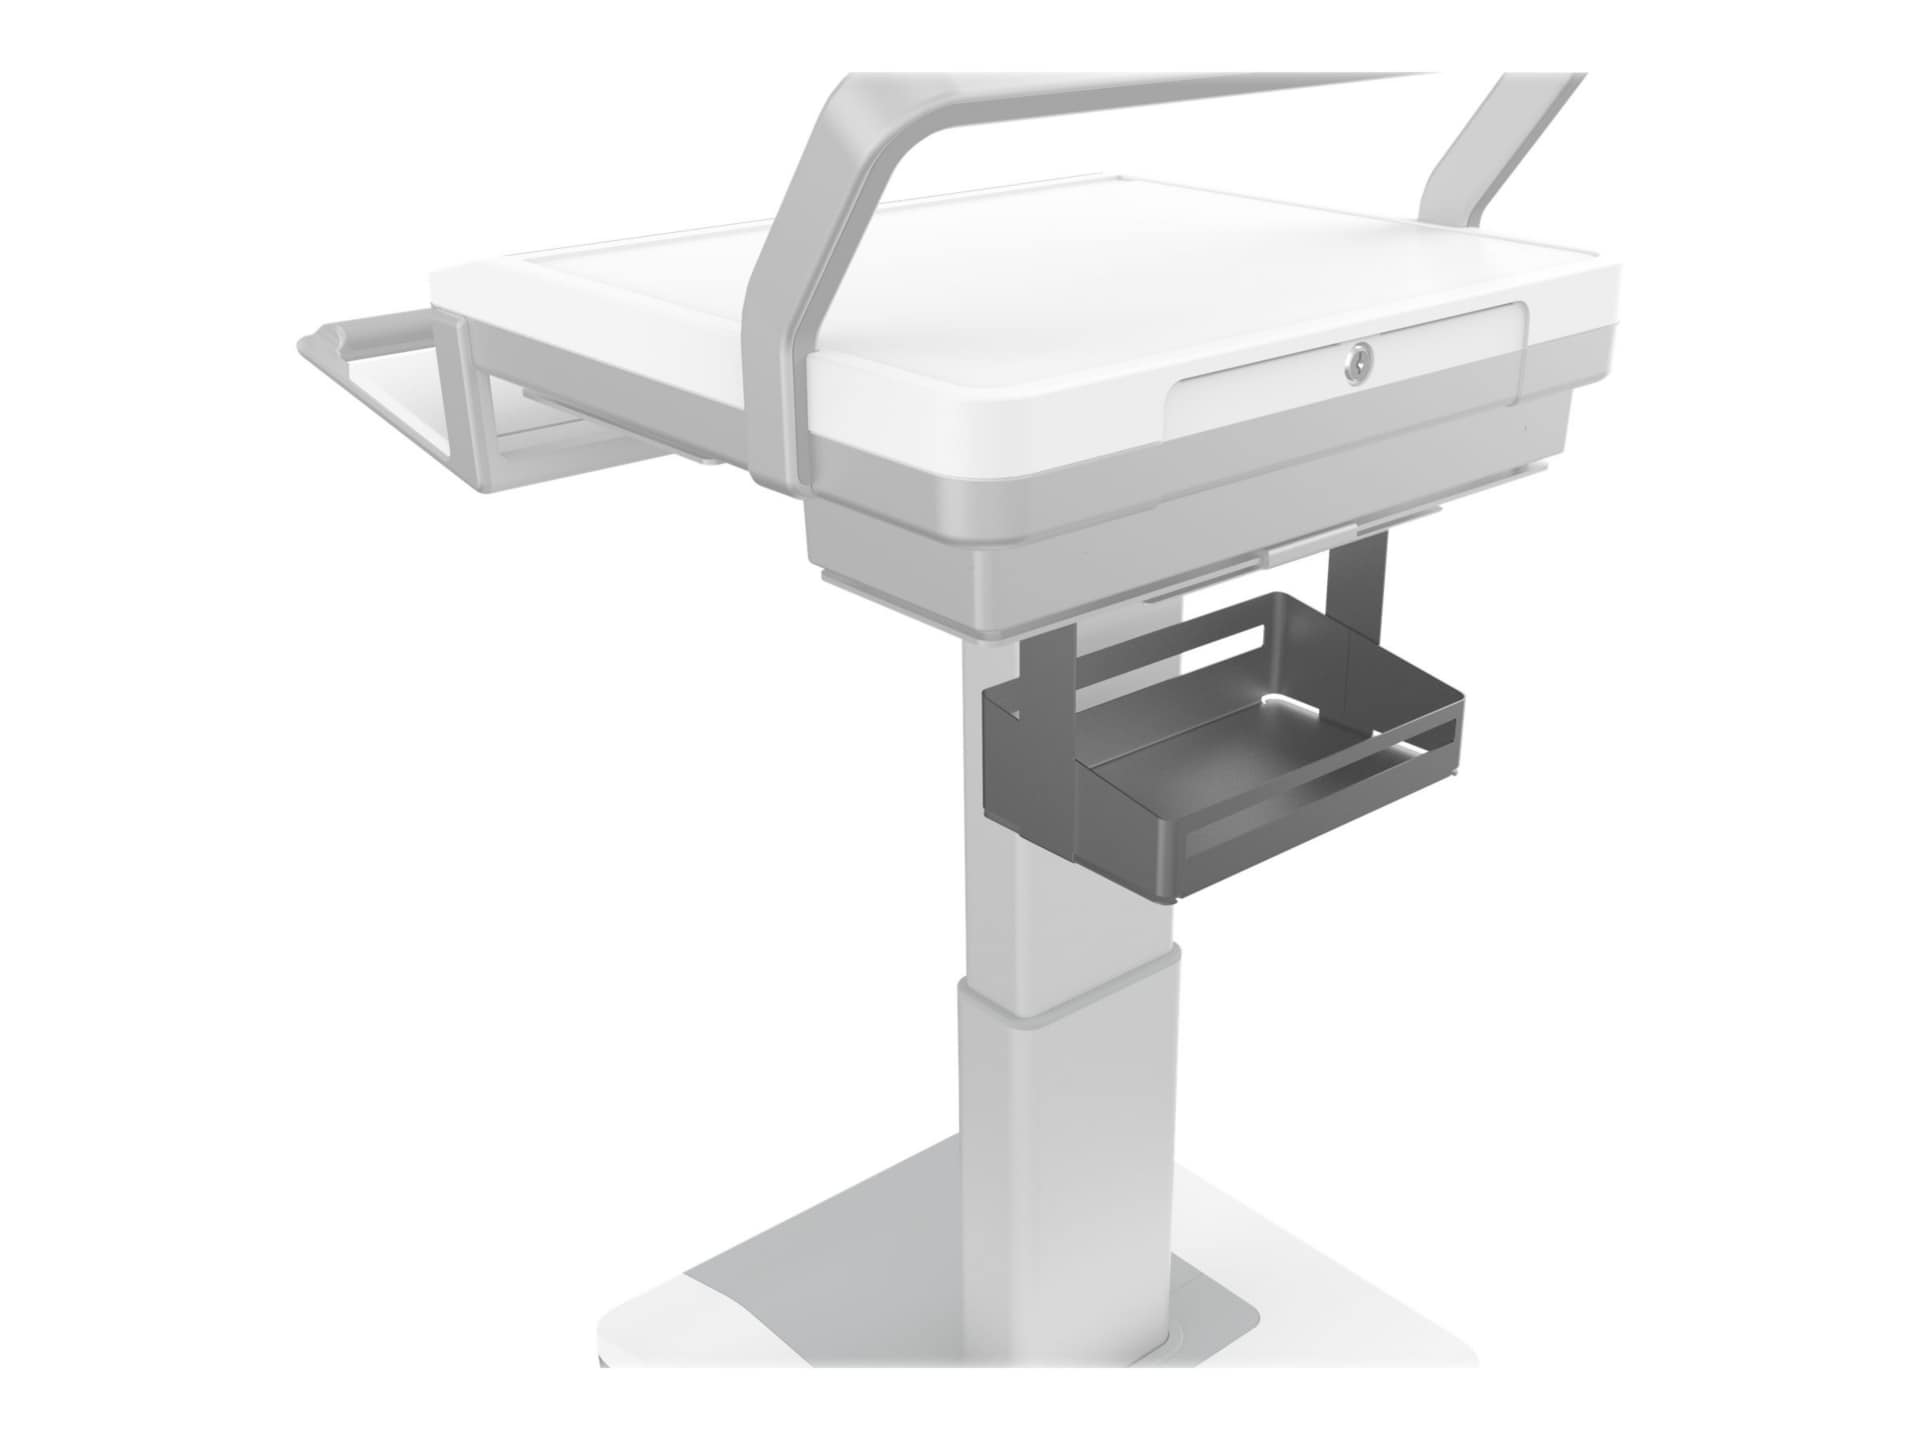 Capsa Healthcare T7 Accessory - Utility Basket mounting component